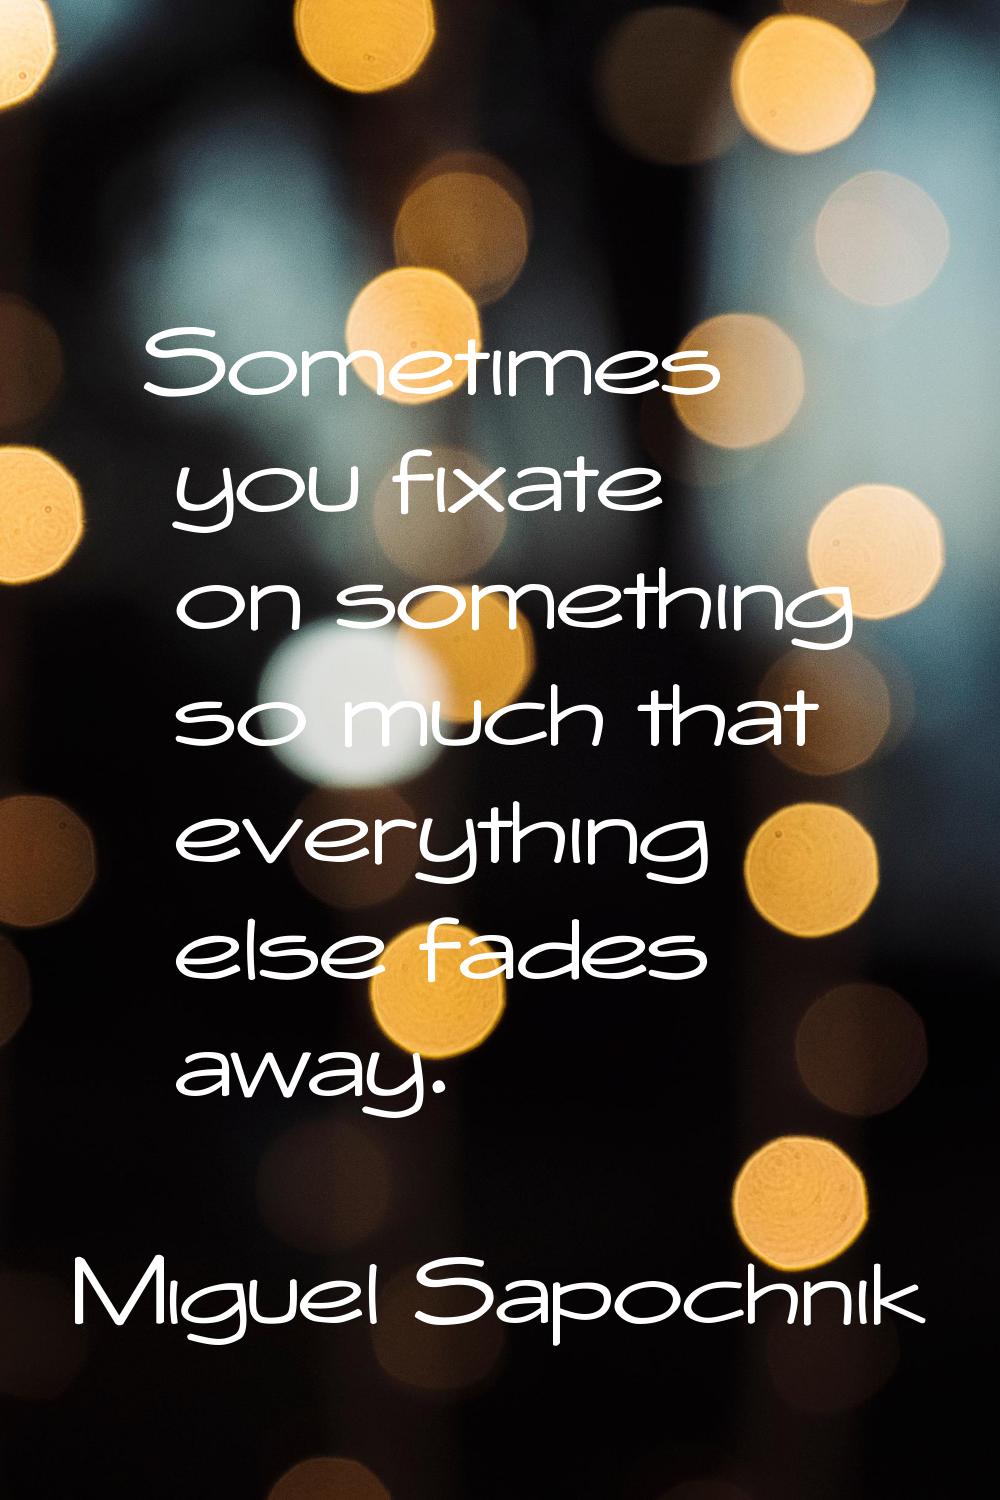 Sometimes you fixate on something so much that everything else fades away.